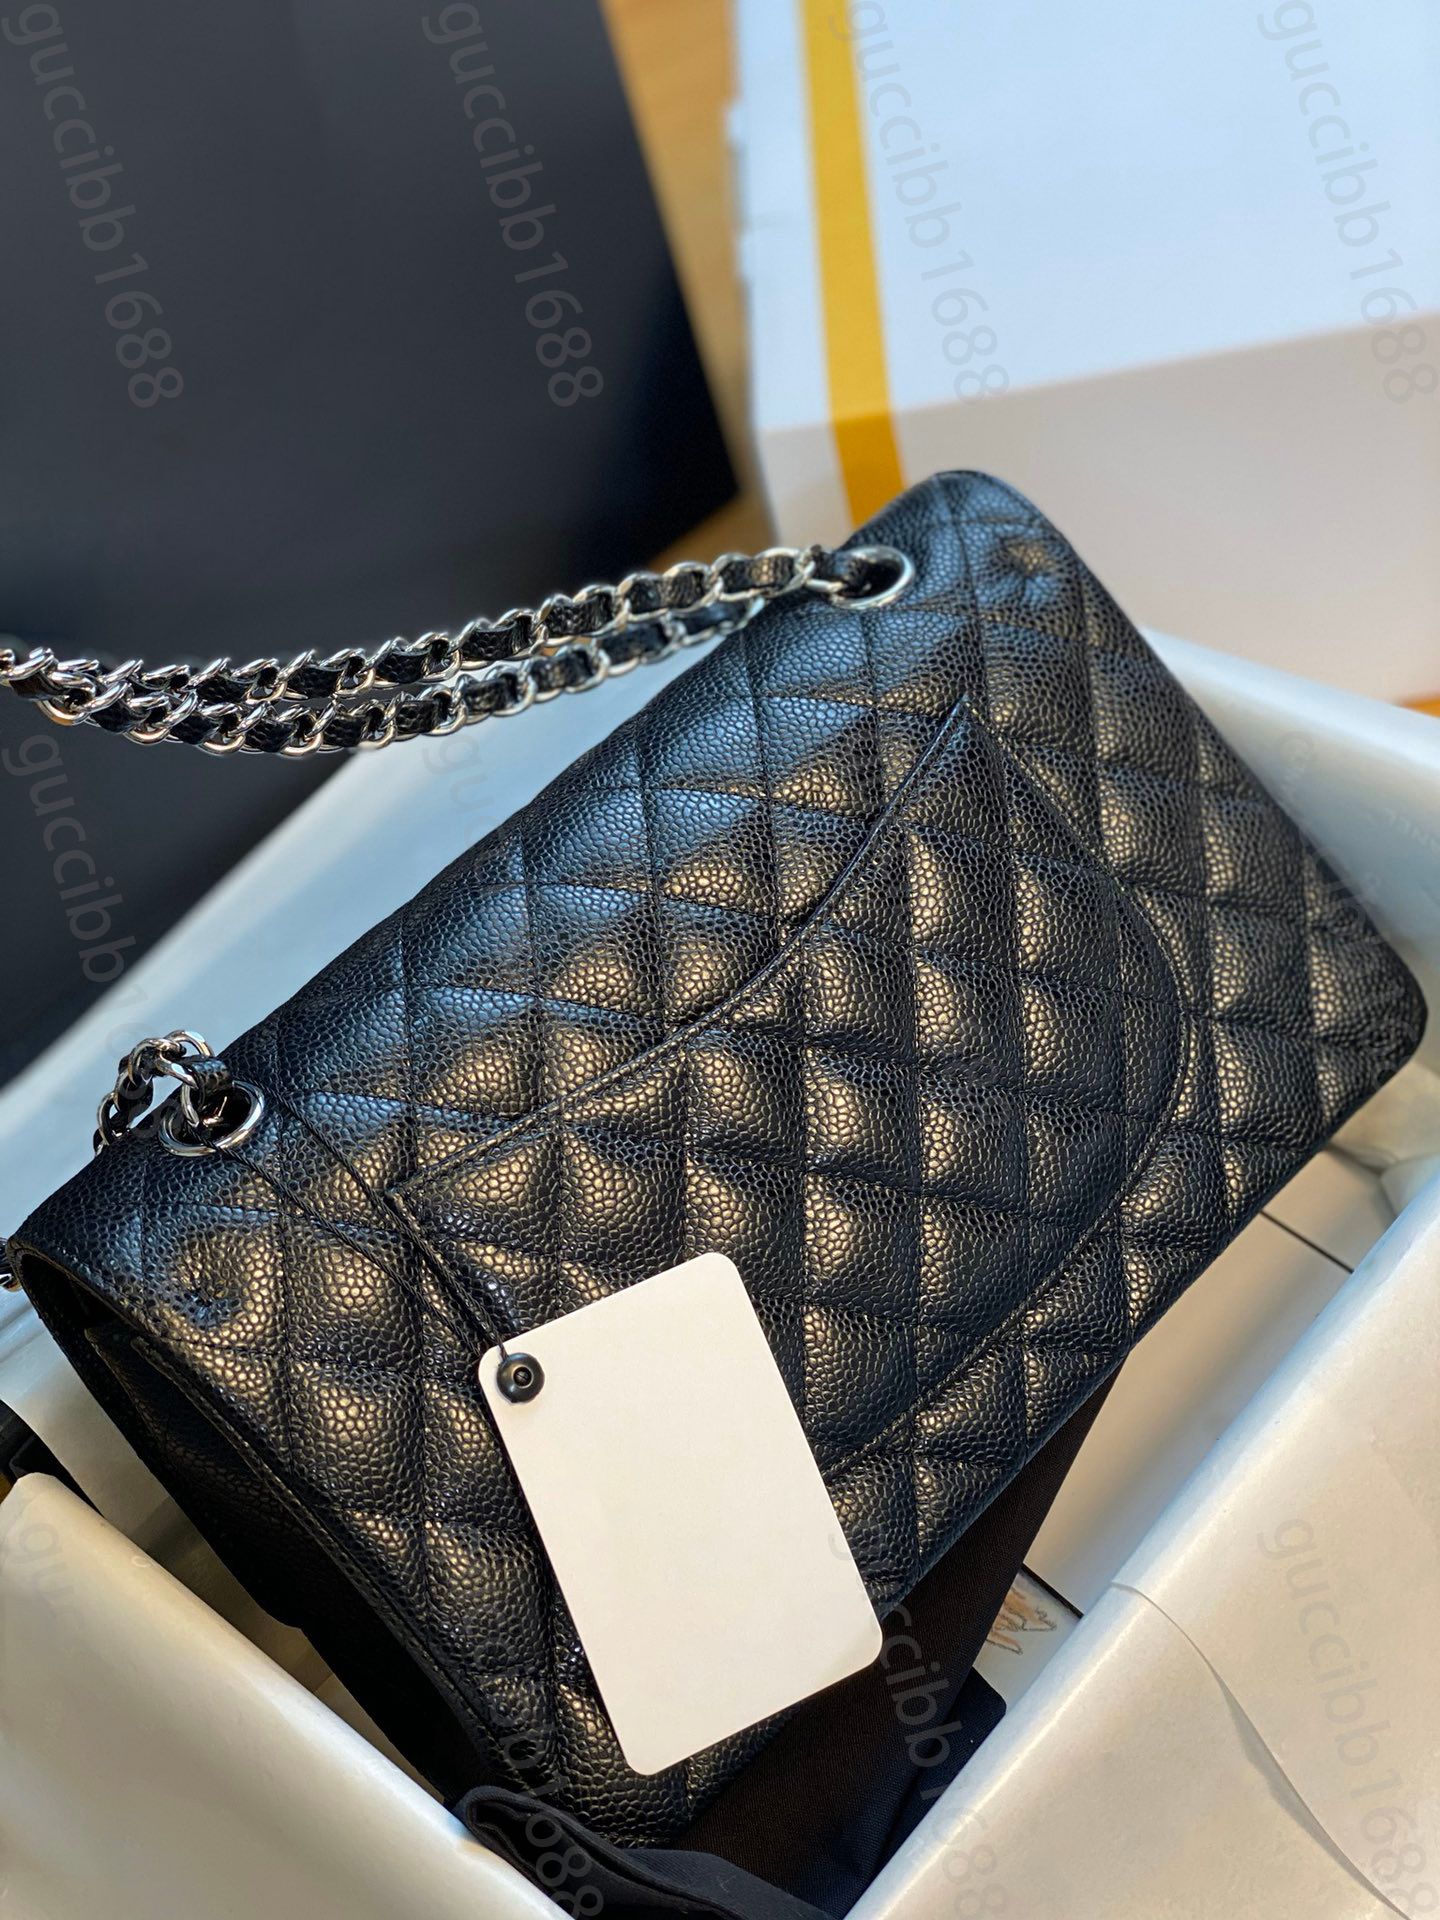 10A Mirror Quality Classic Quilted Double Flap Bag 25cm Medium Top Tier  Genuine Leather Bags Caviar Lambskin Black Purses Shoulder Chain Box Bag  Designer Handbag From Guccibb1688, $206.21